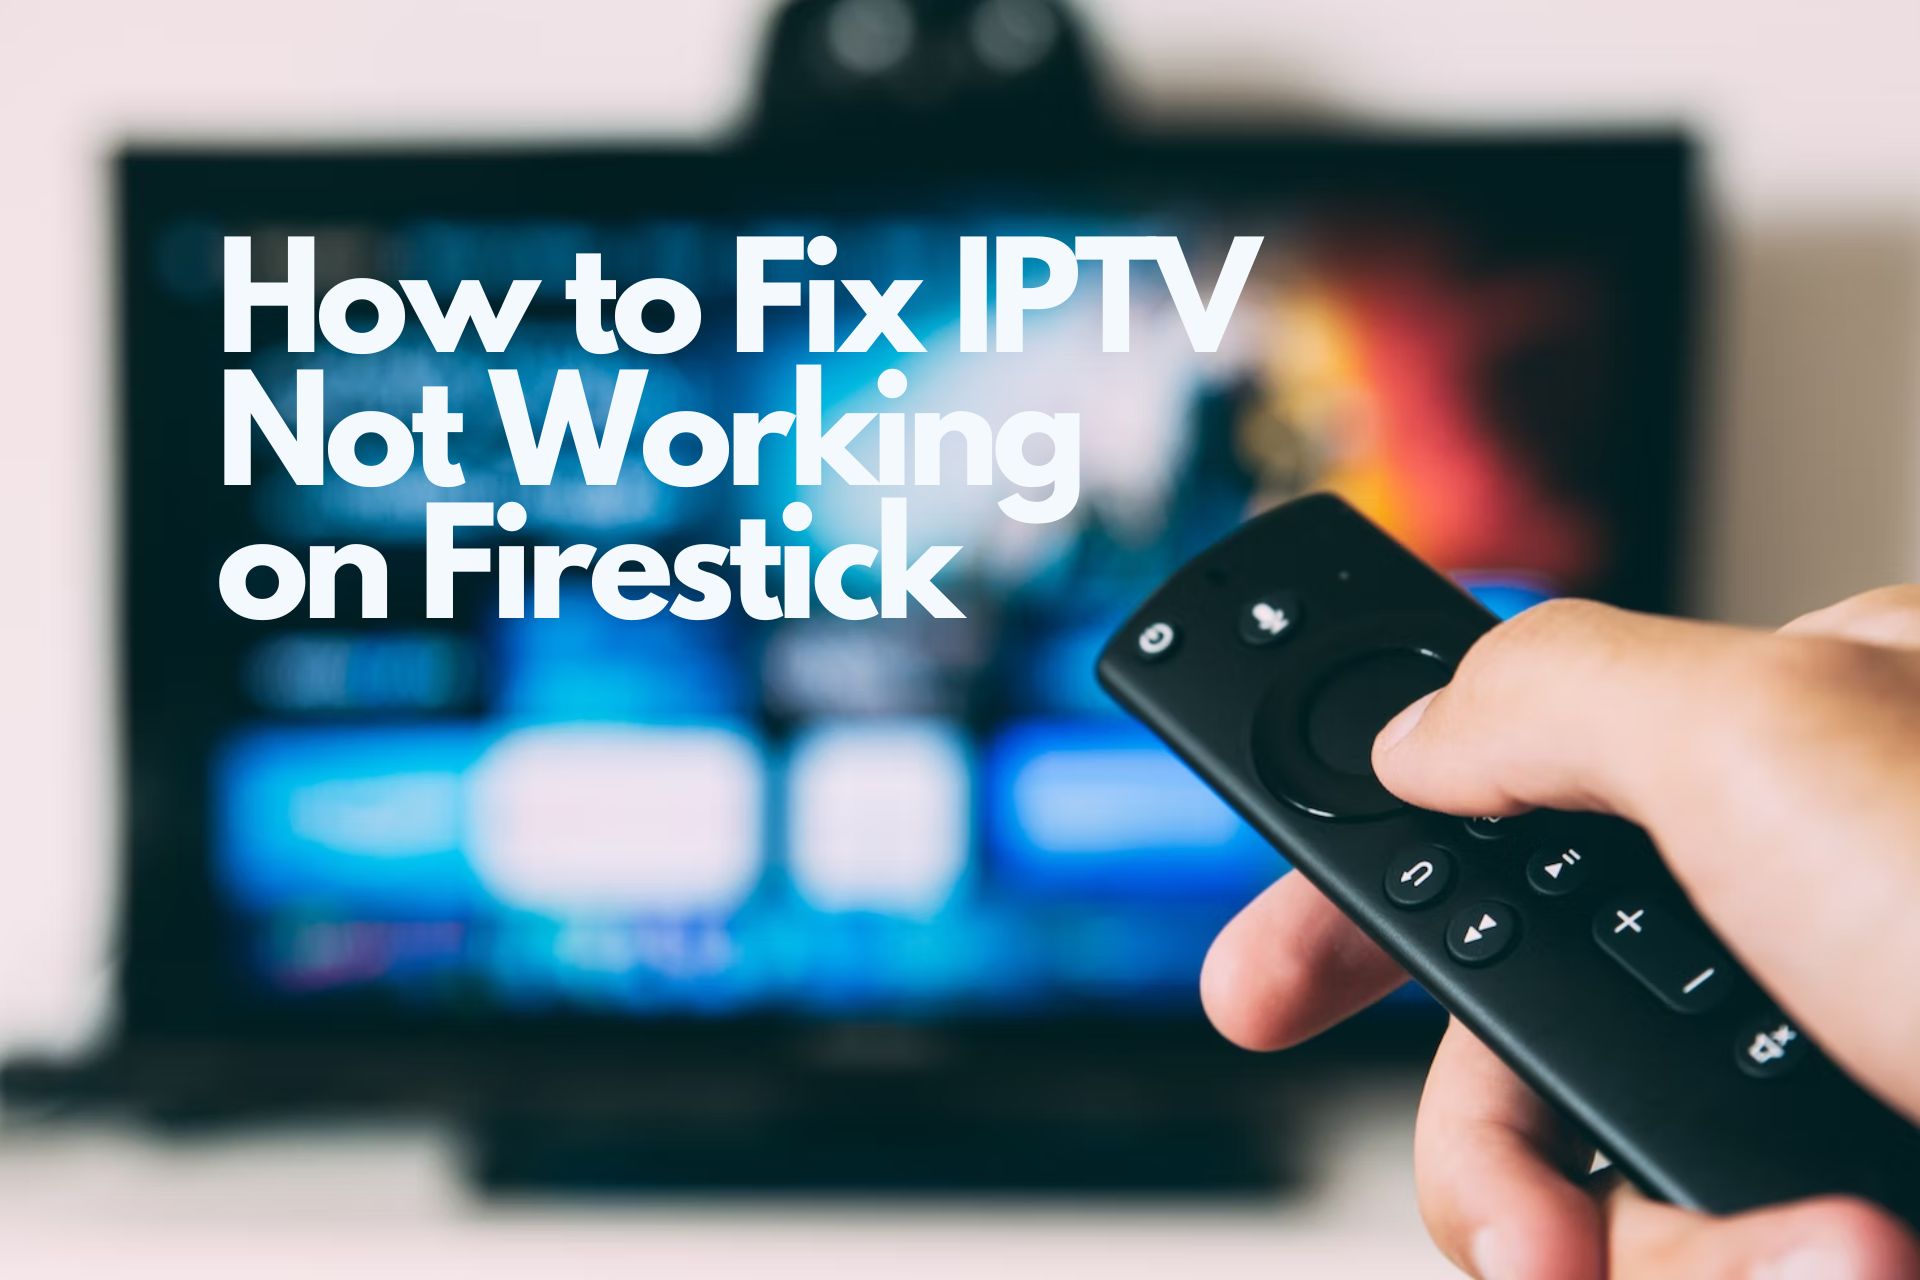 How to IPTV not working on Firestick